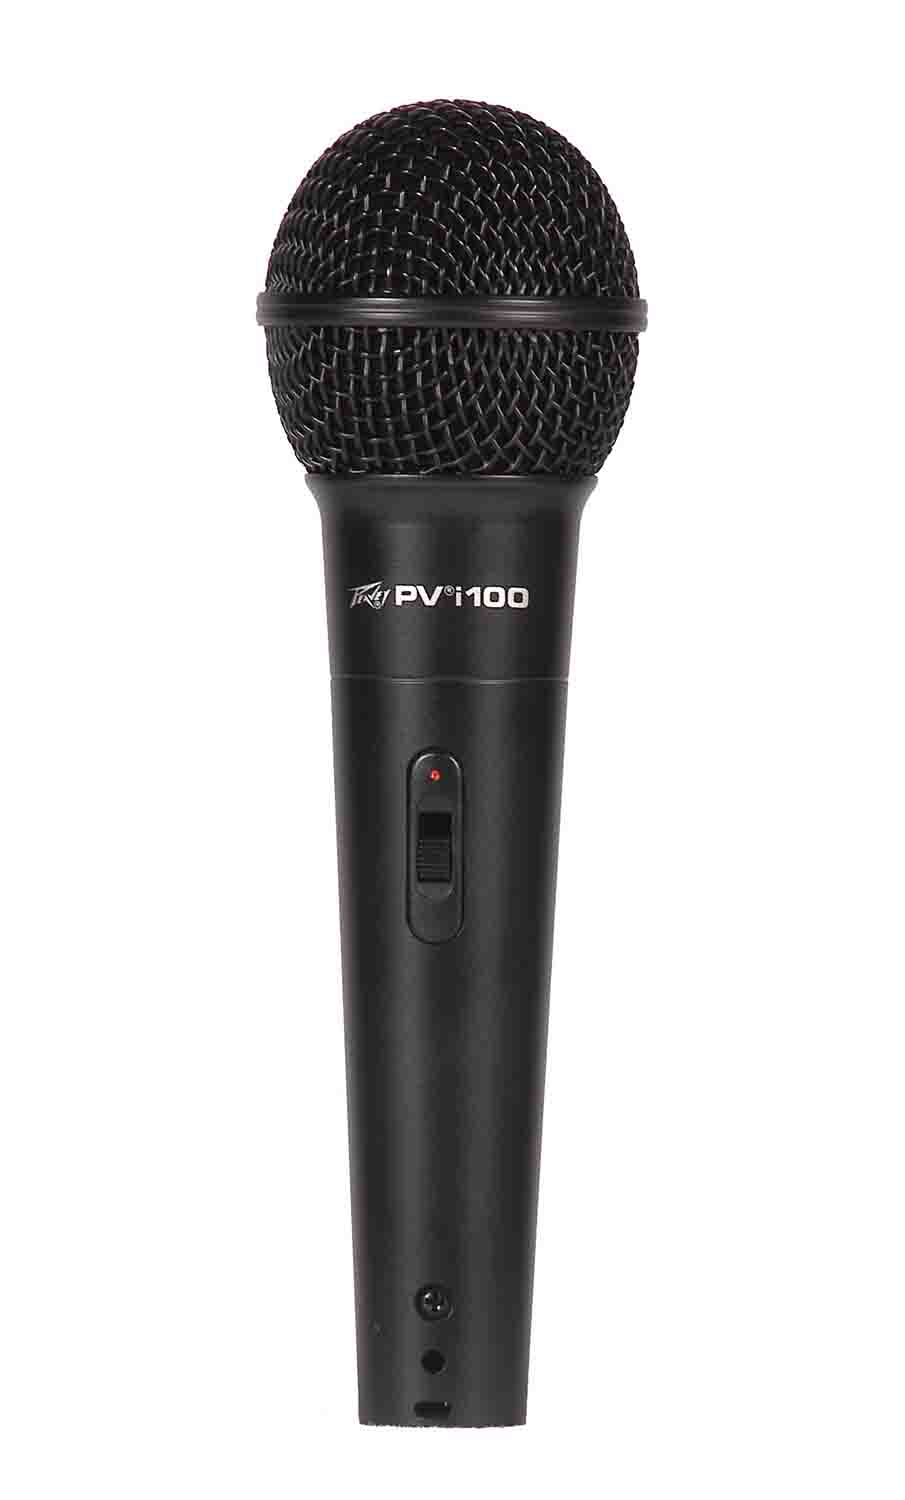 Peavey PVI 100 1/4, Dynamic Cardioid Microphone with 1/4-inch Cable - Hollywood DJ